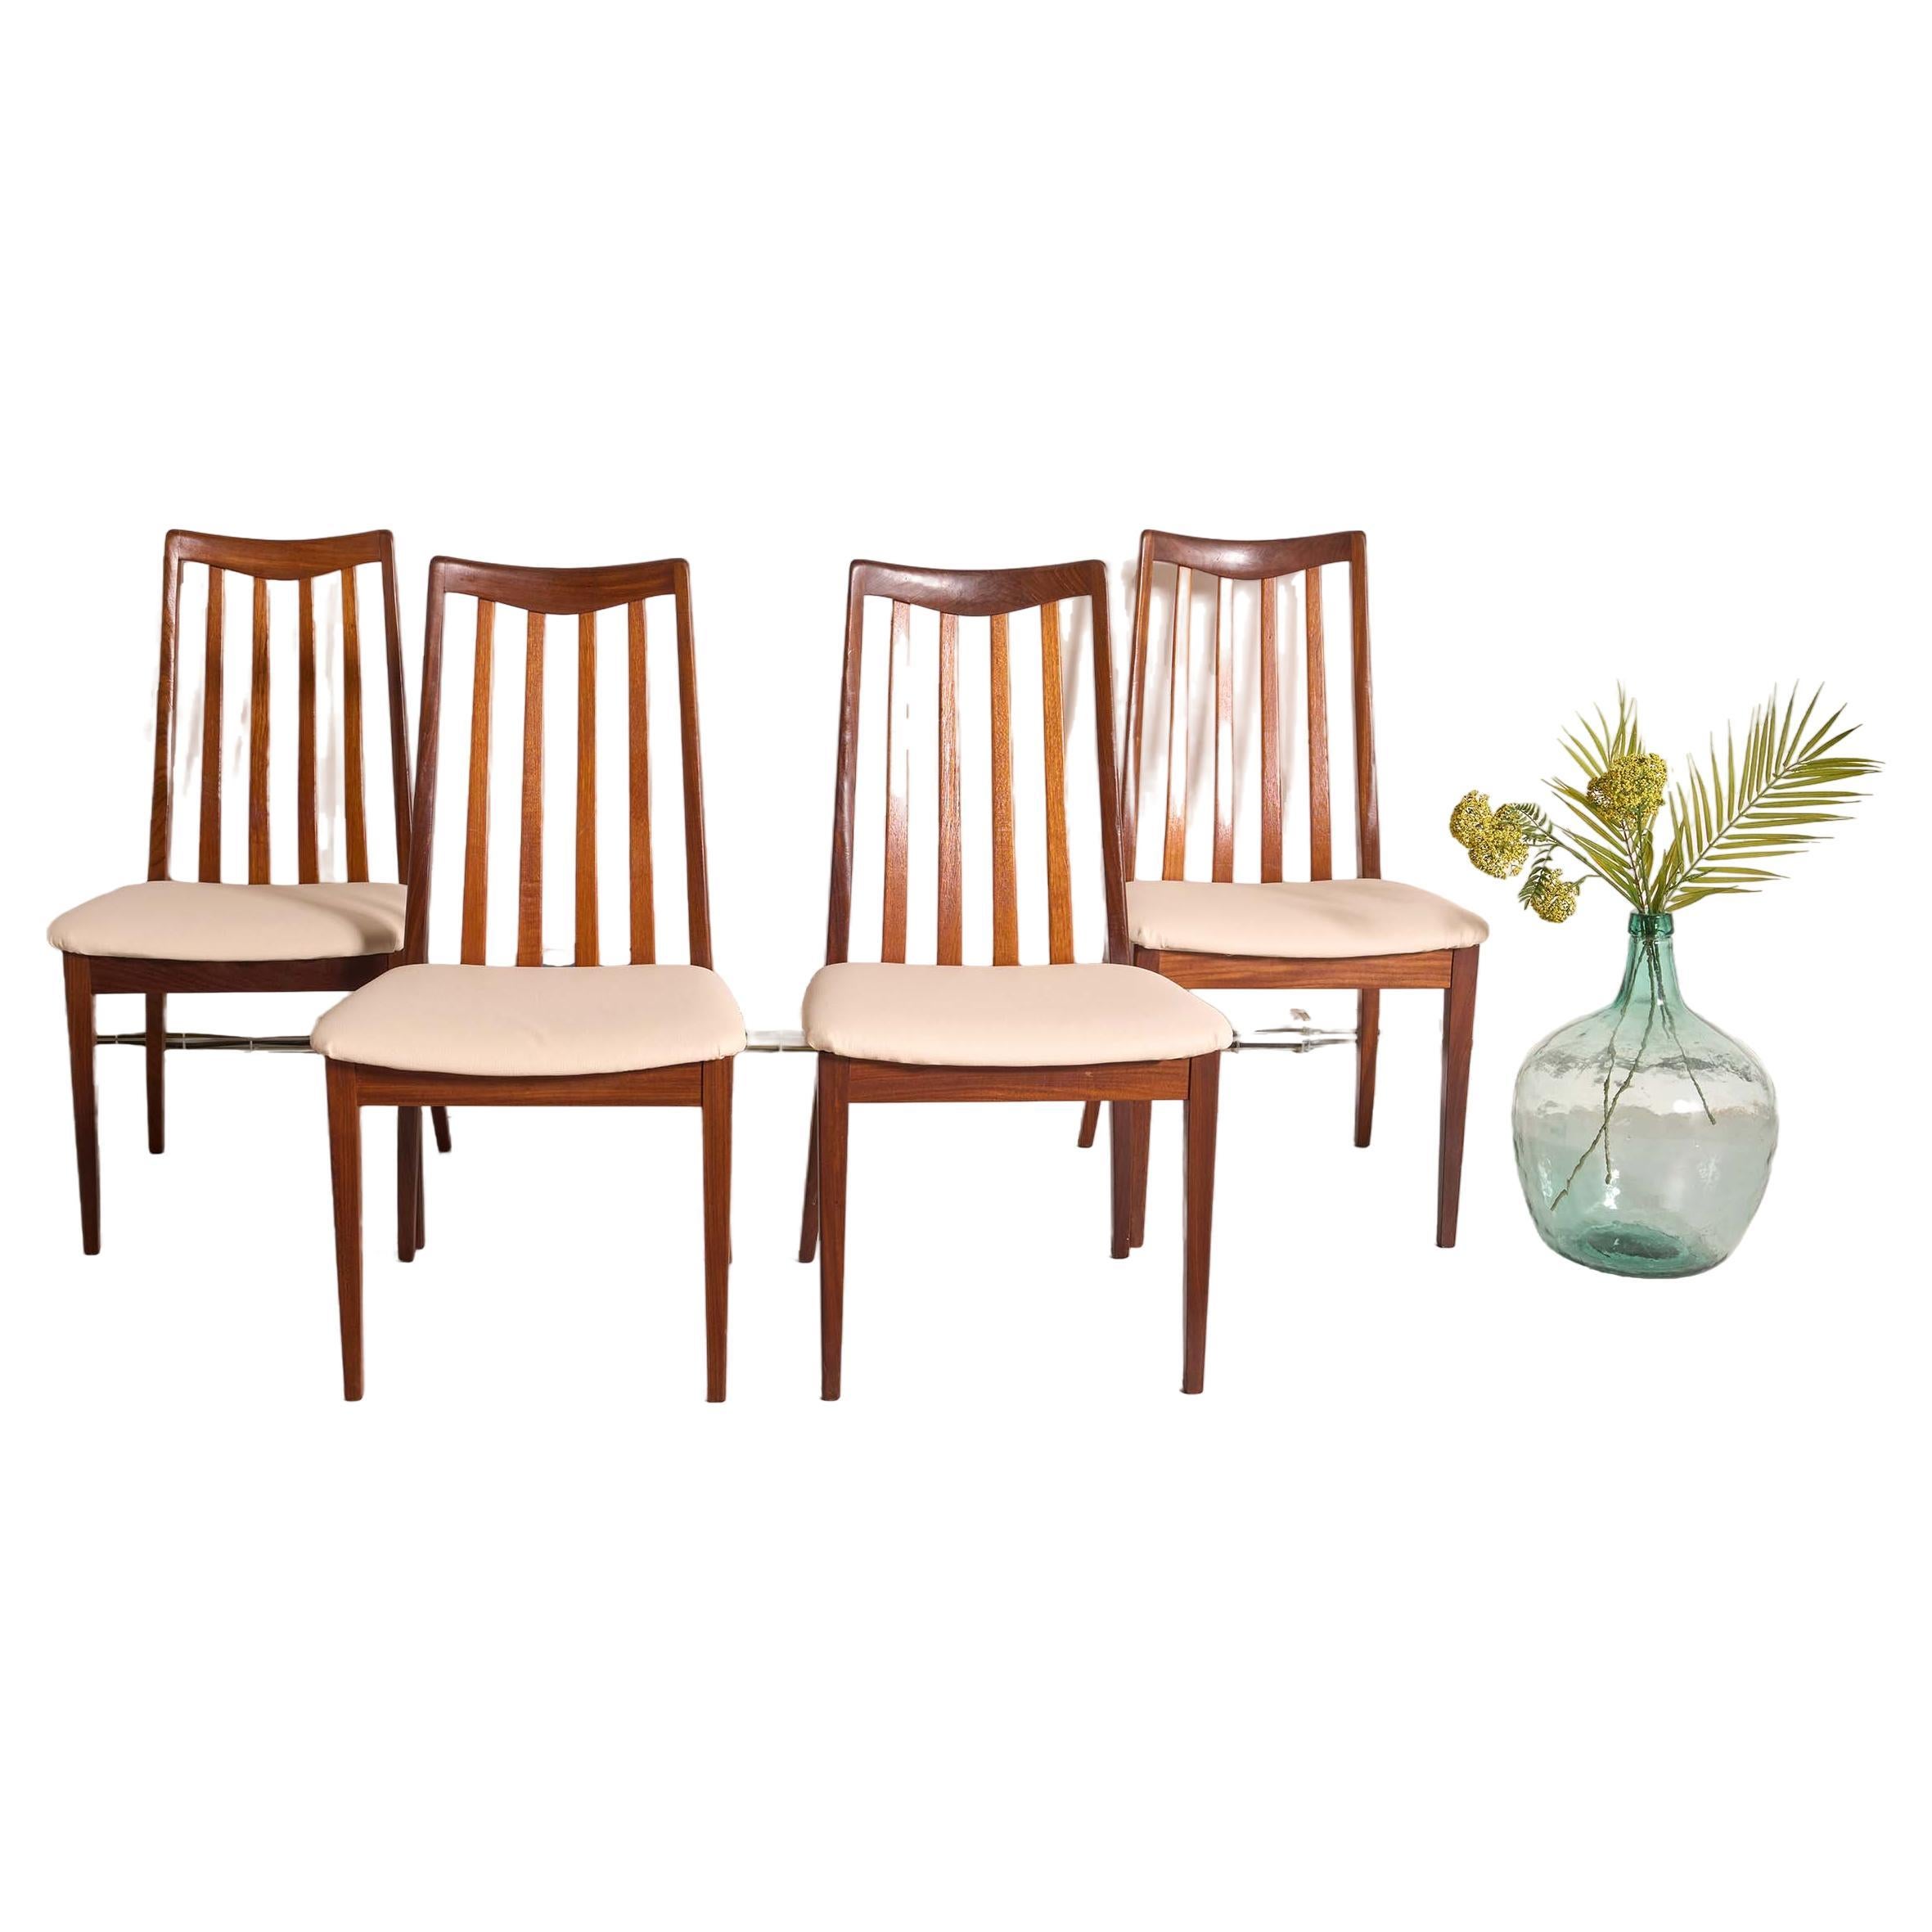 4 mid century G Plan dining chairs